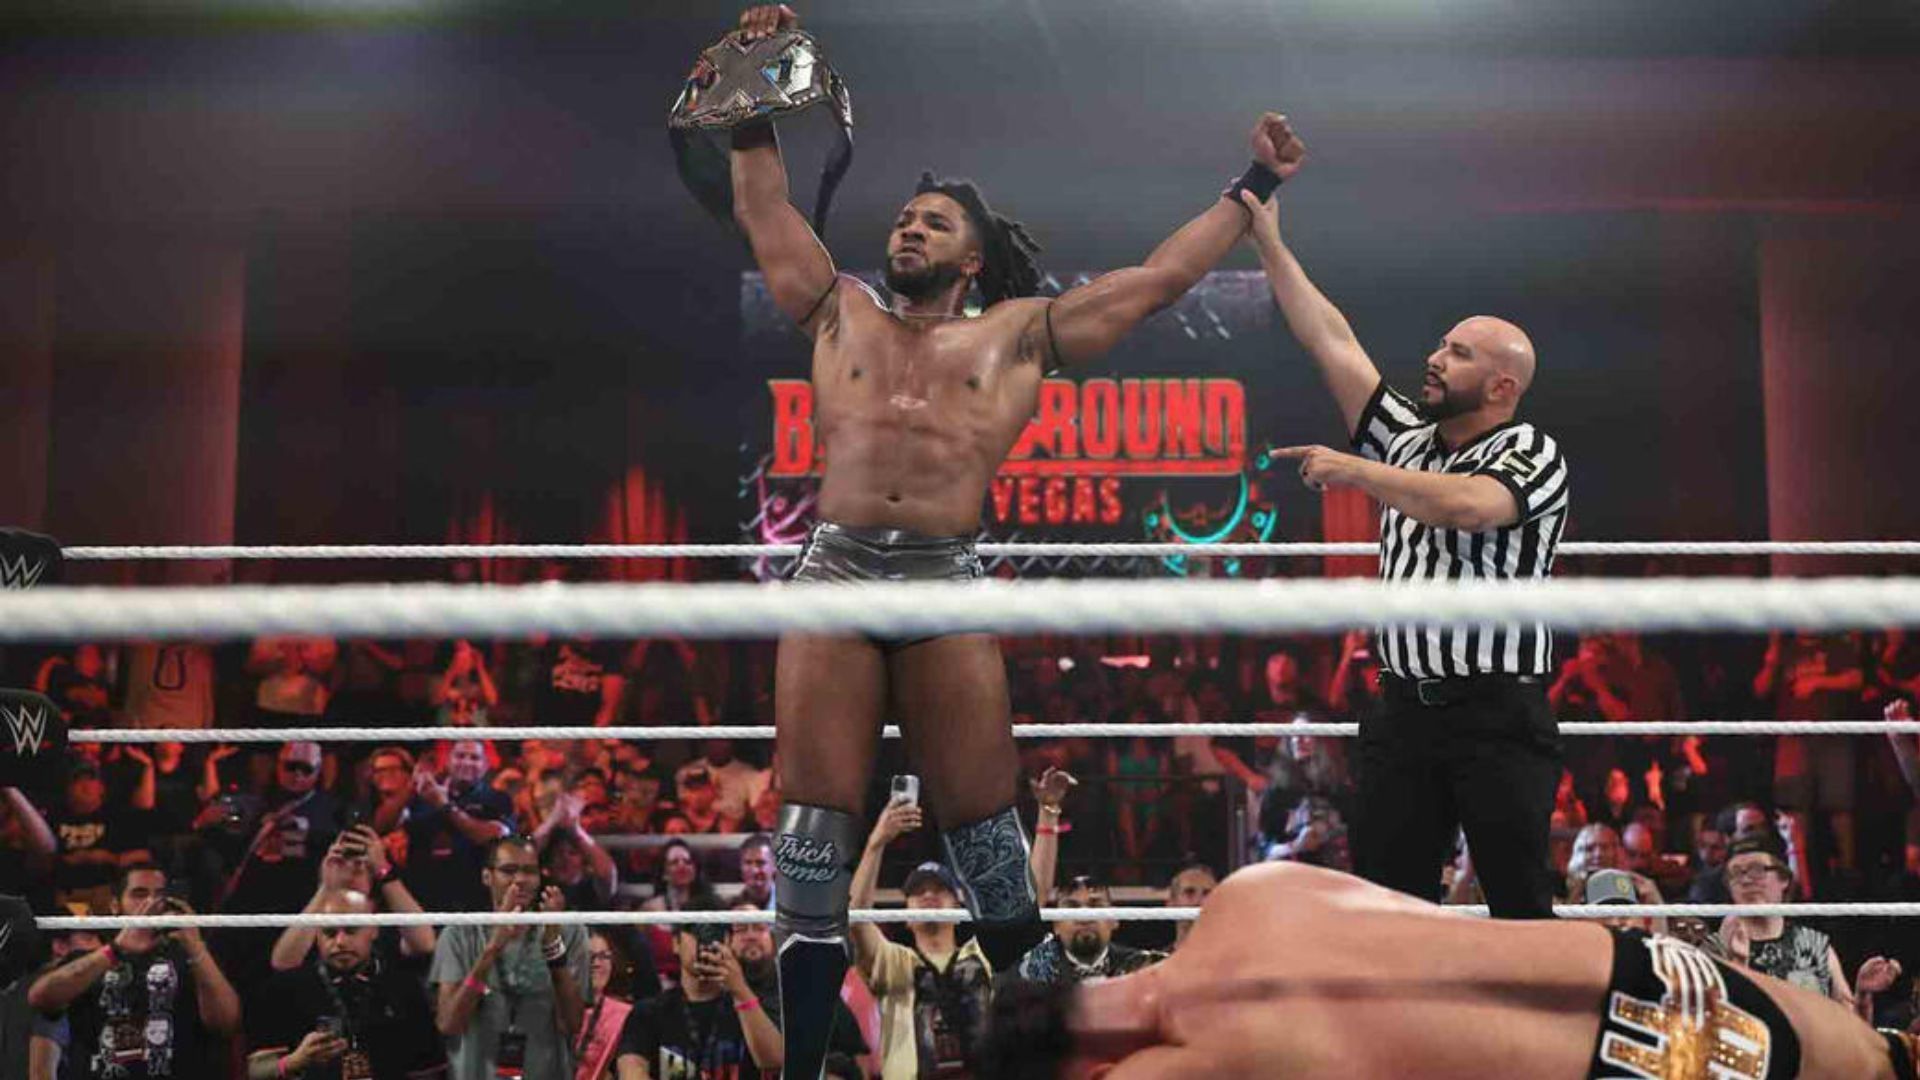 Williams is the current NXT Champion. [Photo: WWE.com]